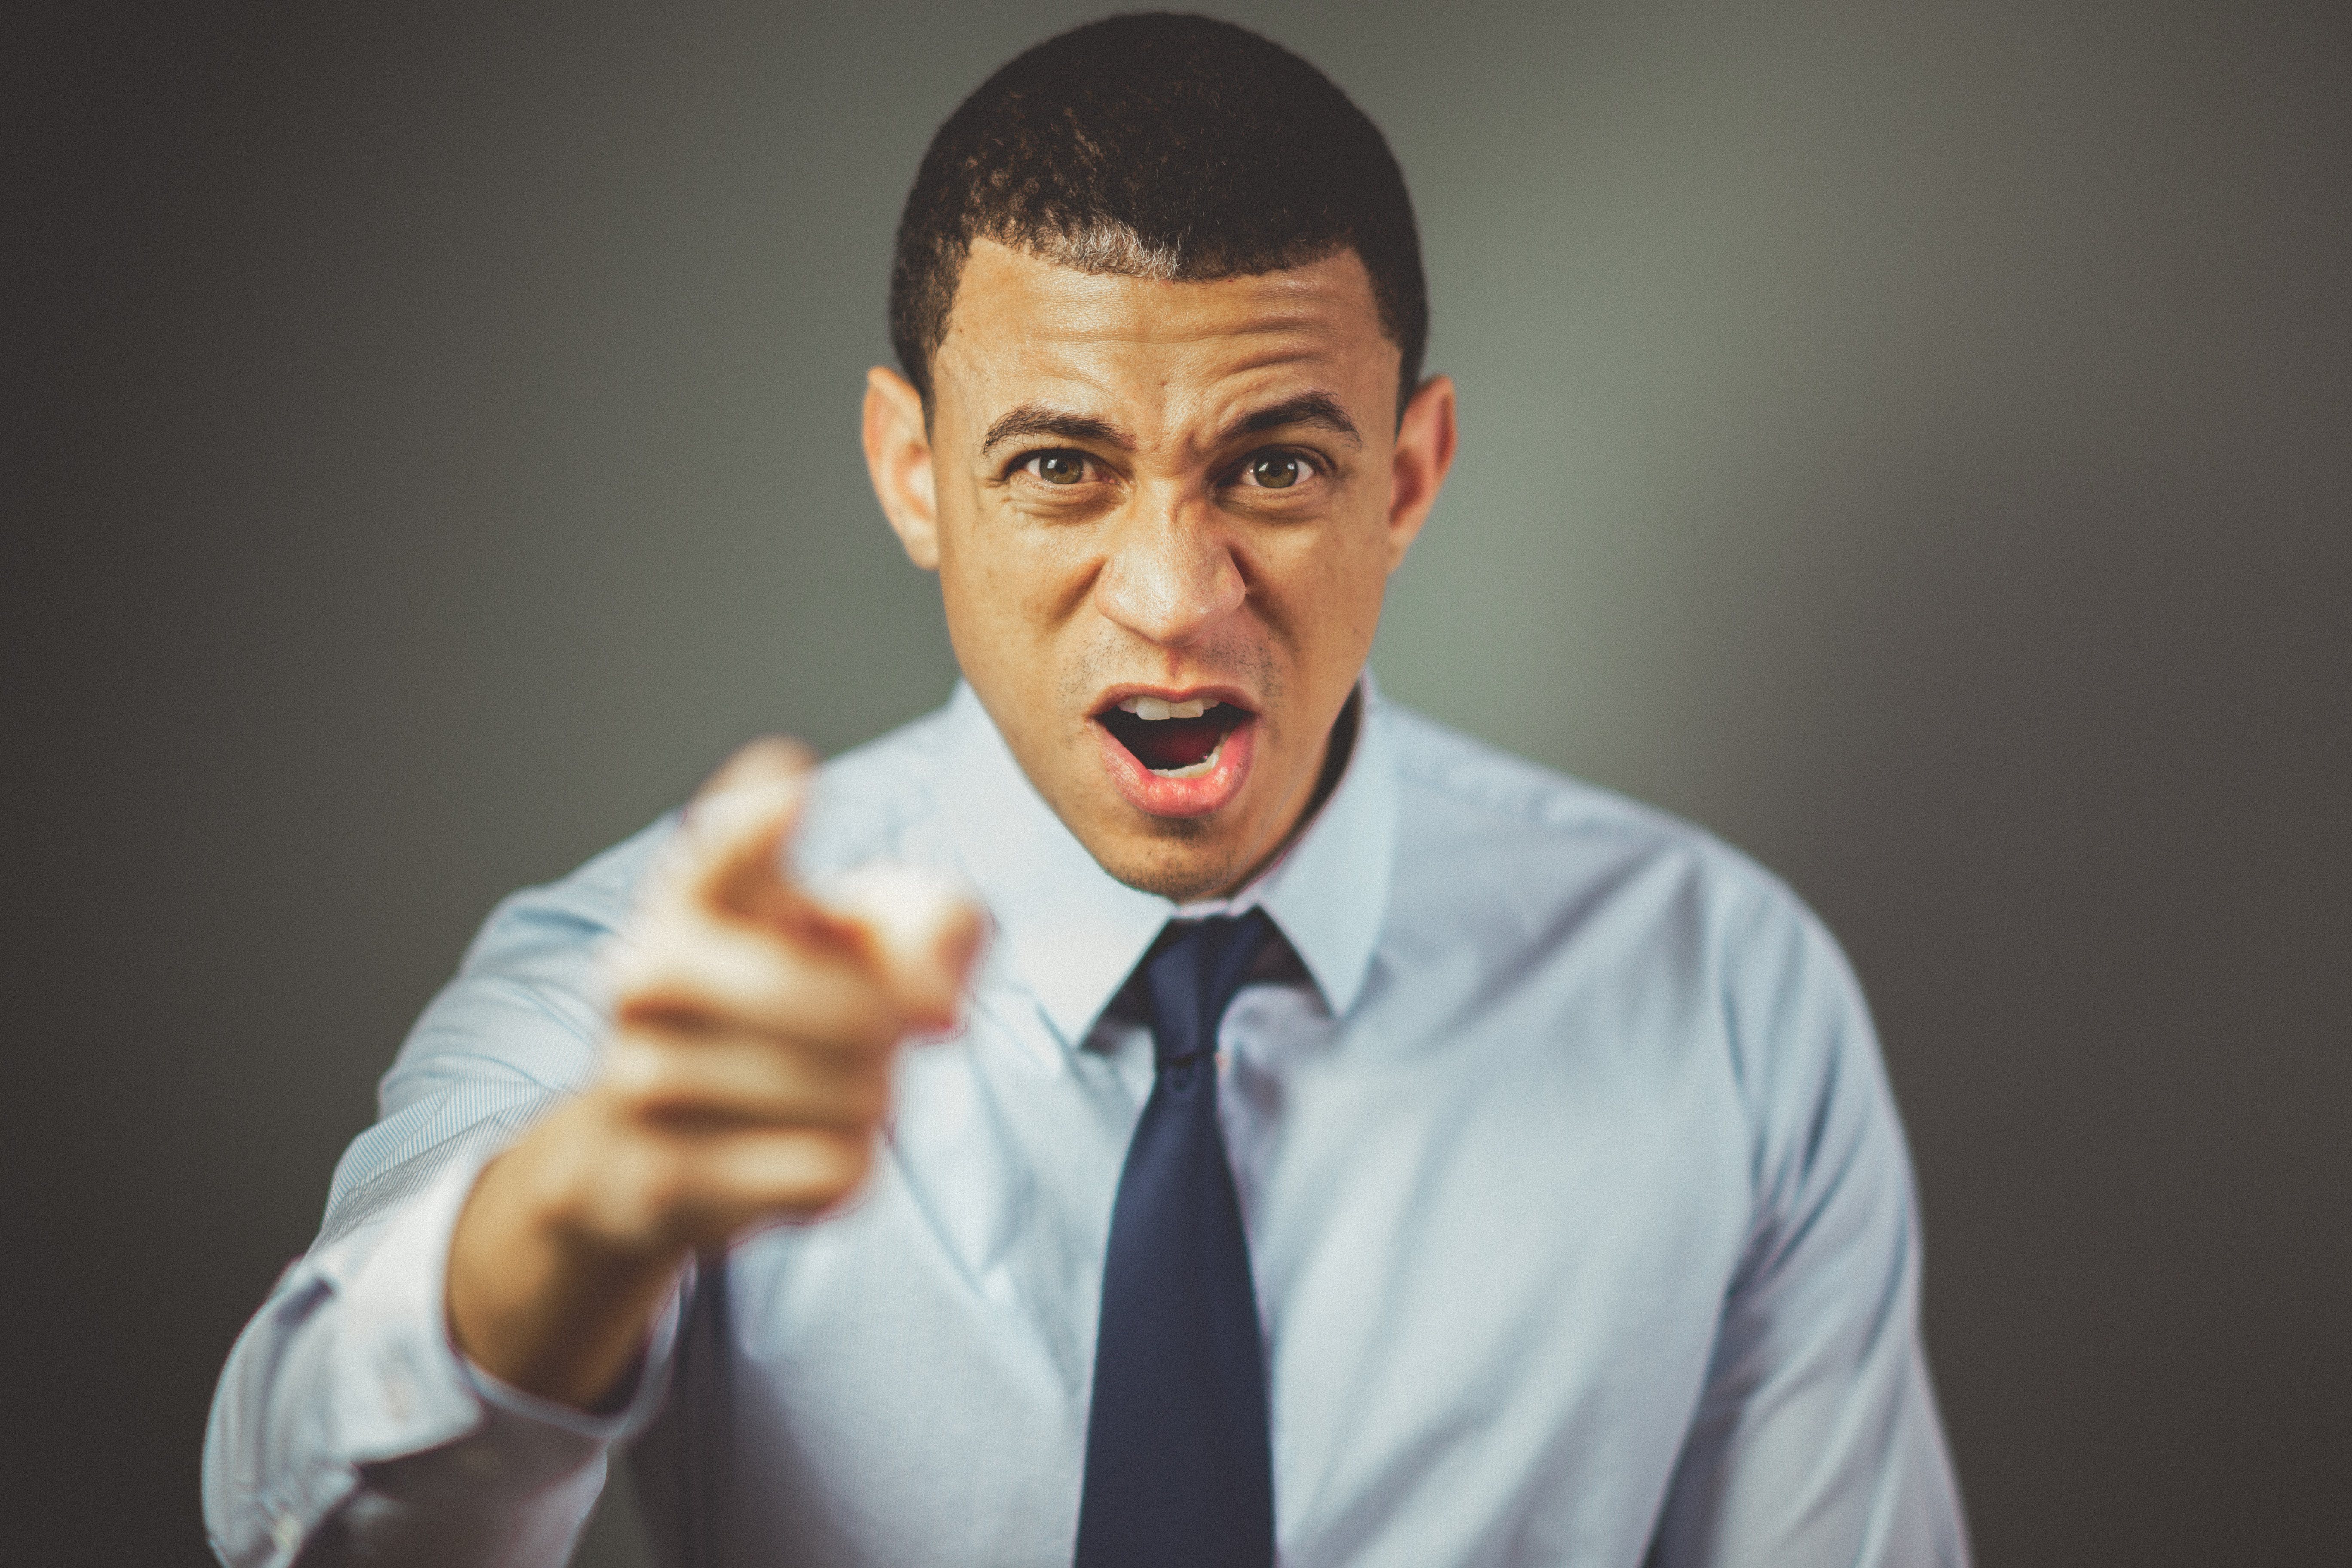 An angry man points forward with one finger | Source: Pexels